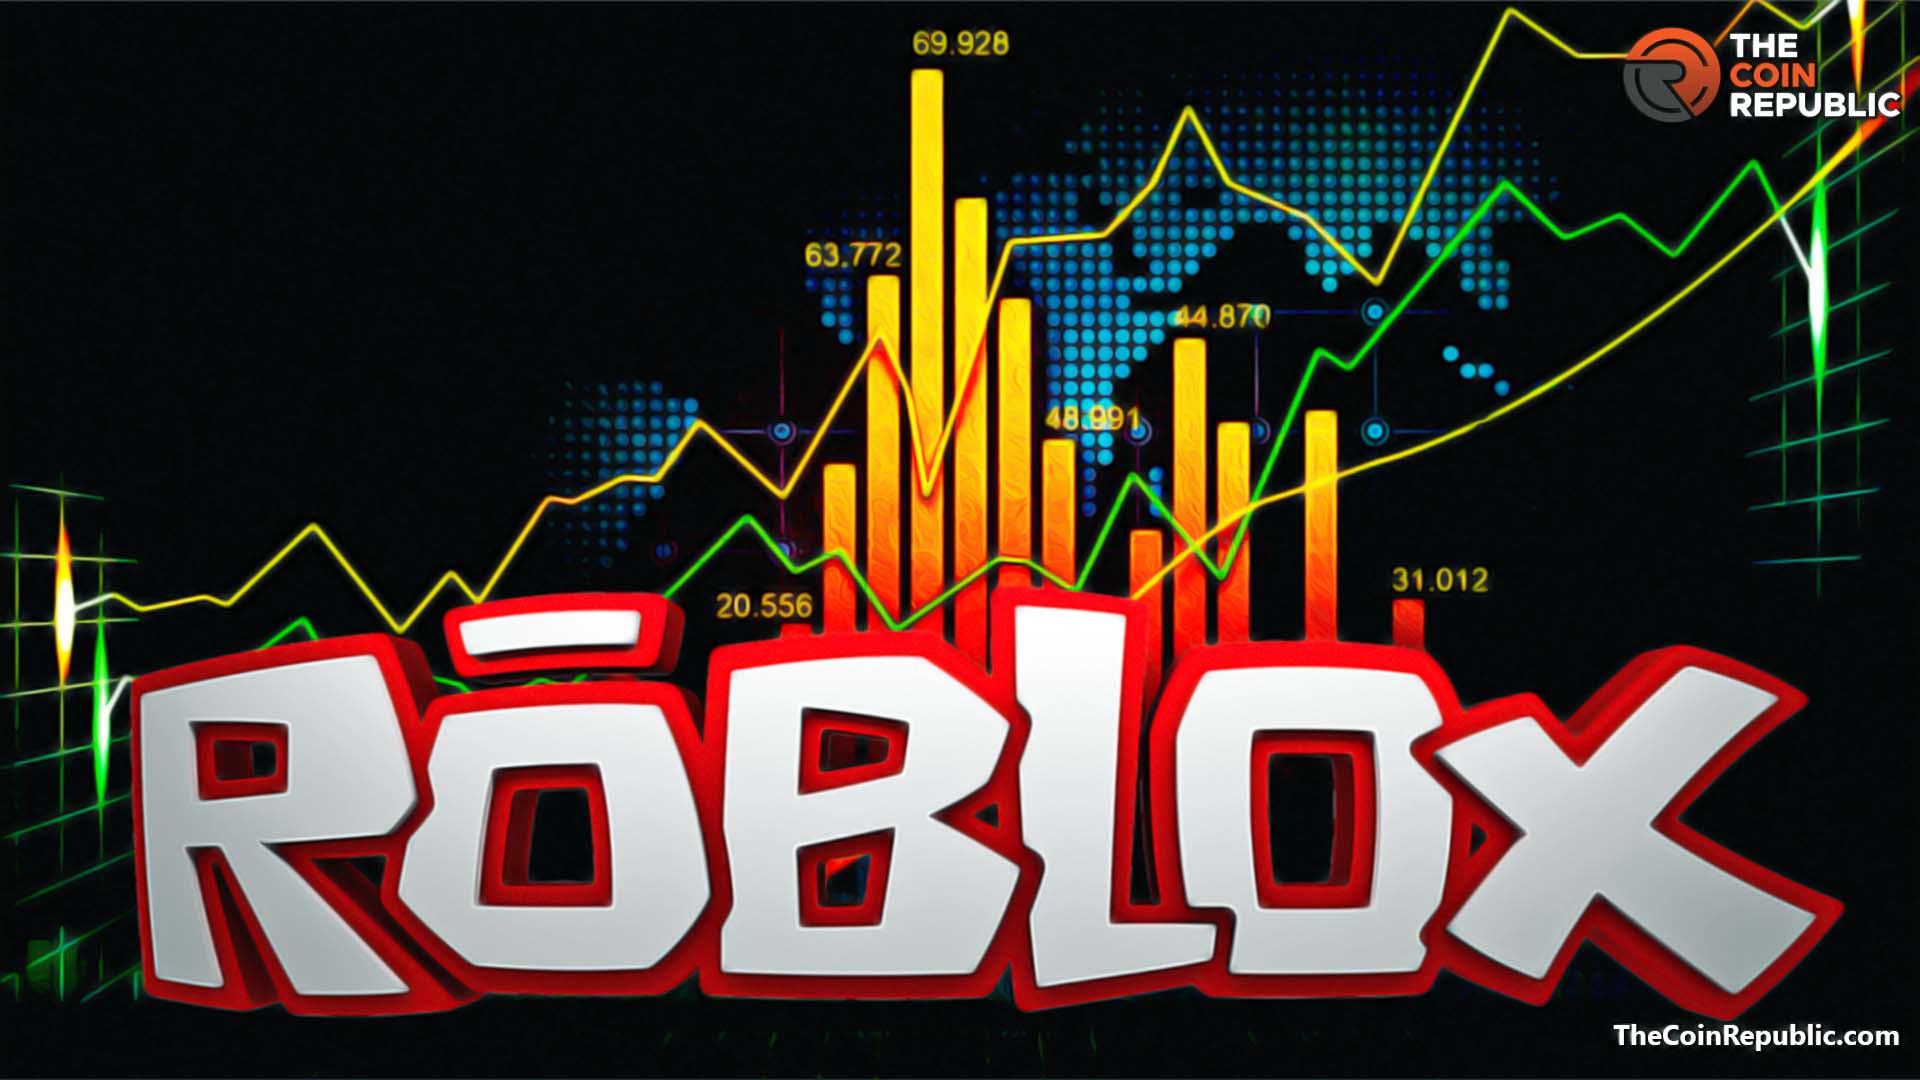 Roblox goes public on New York Stock Exchange with $41 billion